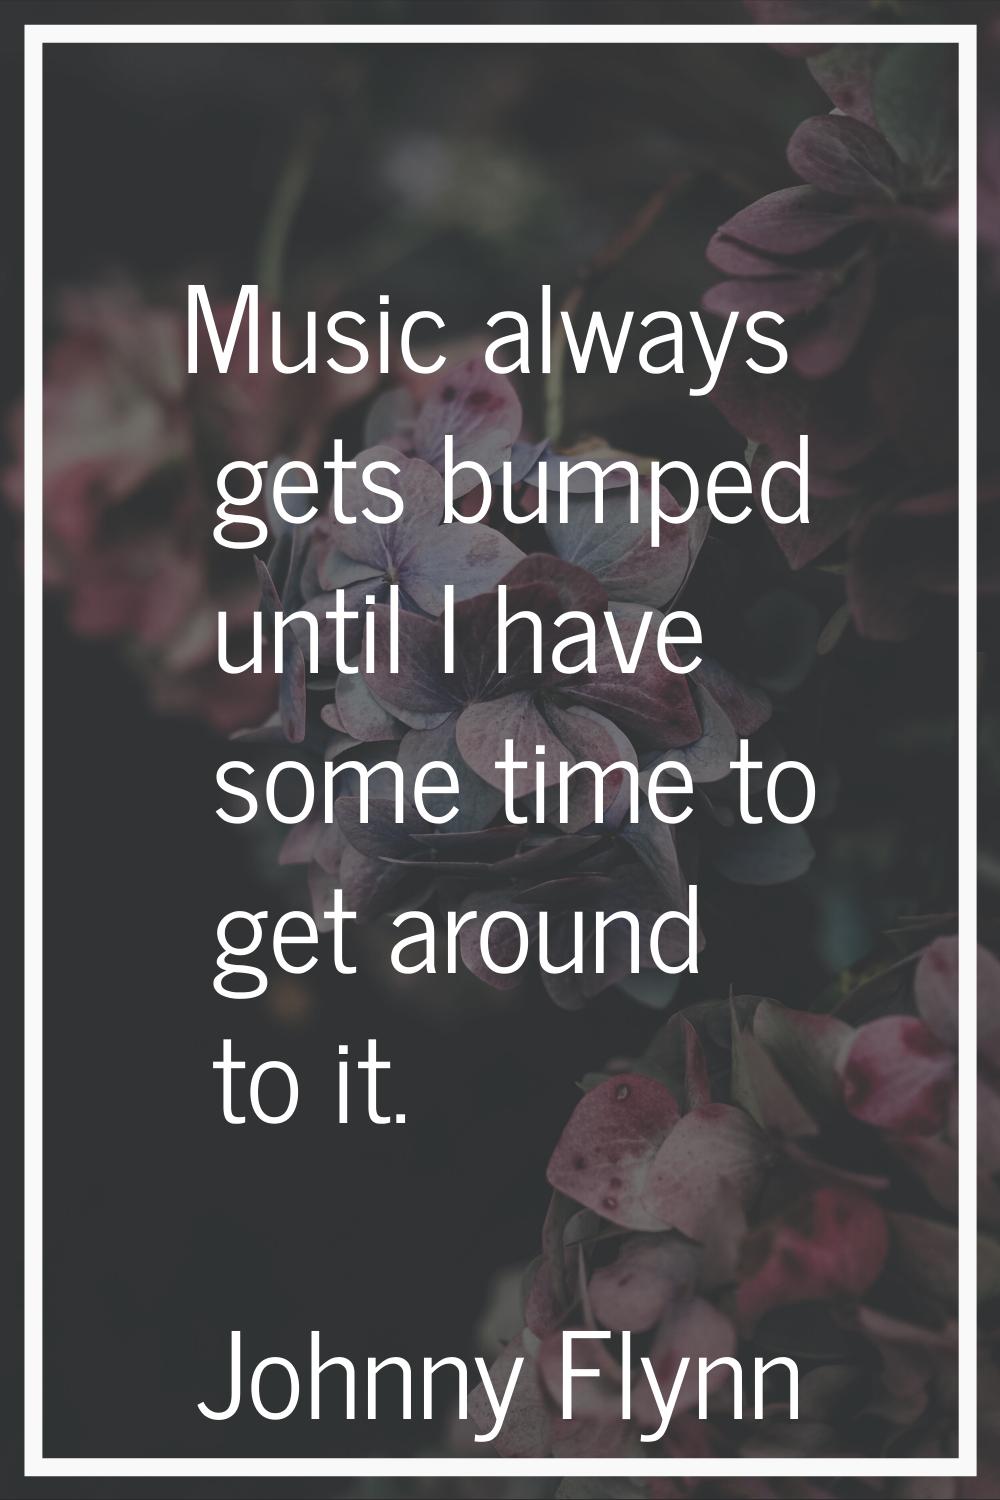 Music always gets bumped until I have some time to get around to it.